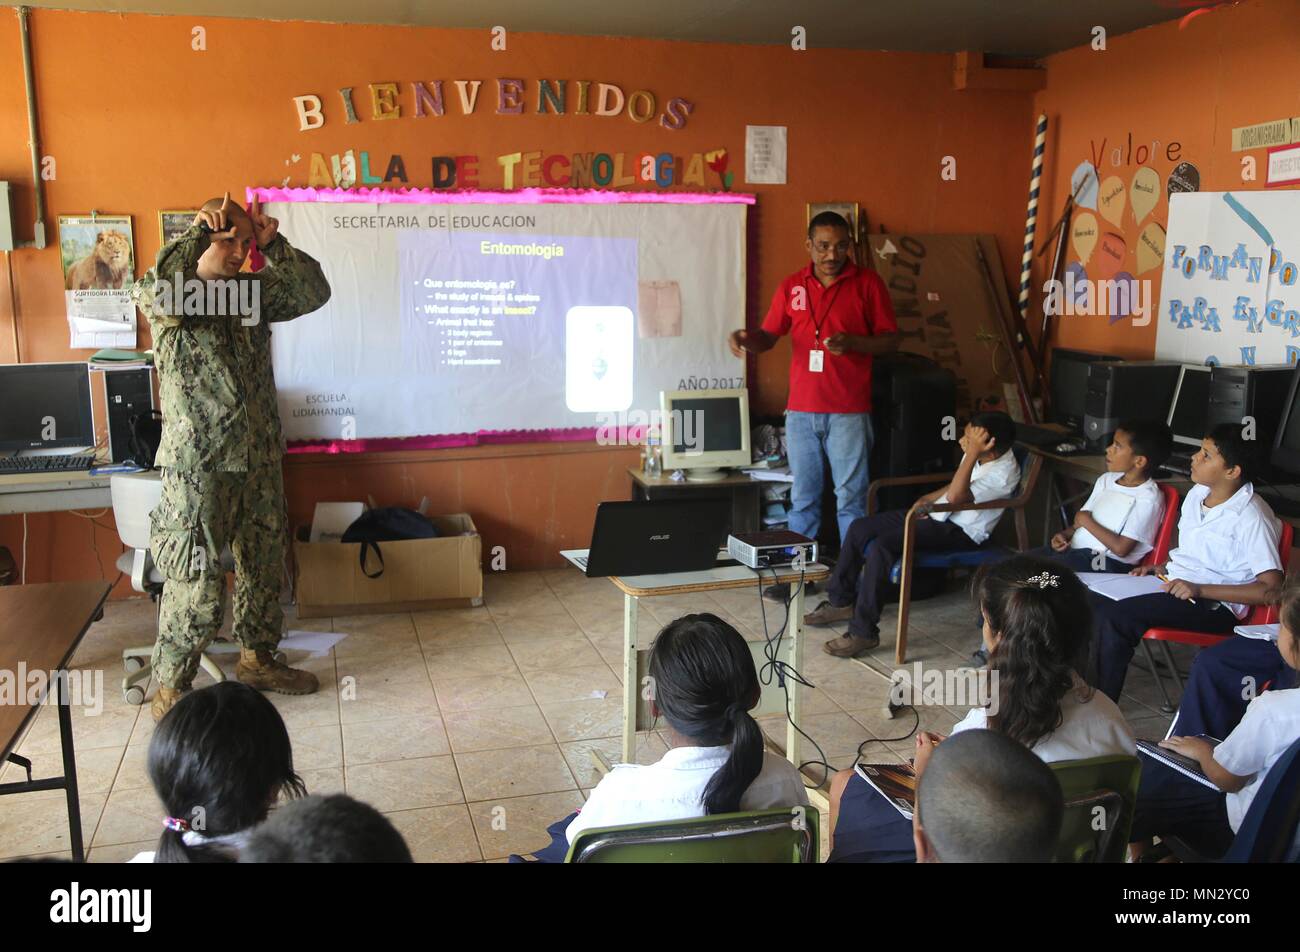 170823-A-QE286-0276 AGUAN, Honduras (August 23, 2017) U.S. Navy Lt. Cmdr. Ian Sutherland, technical director for the Navy Entomology Center of Excellence, teaches an entomology class at Escuela Lidia Handal, during a Southern Partnership Station 17 community relations project (COMREL). SPS 17 is a U.S. Navy deployment executed by U.S. Naval Forces Southern Command/U.S. 4th Fleet, focused on subject matter expert exchanges with partner nation militaries and security forces in Central and South America. (U.S. Army photo by SPC Judge Jones/Released) Stock Photo